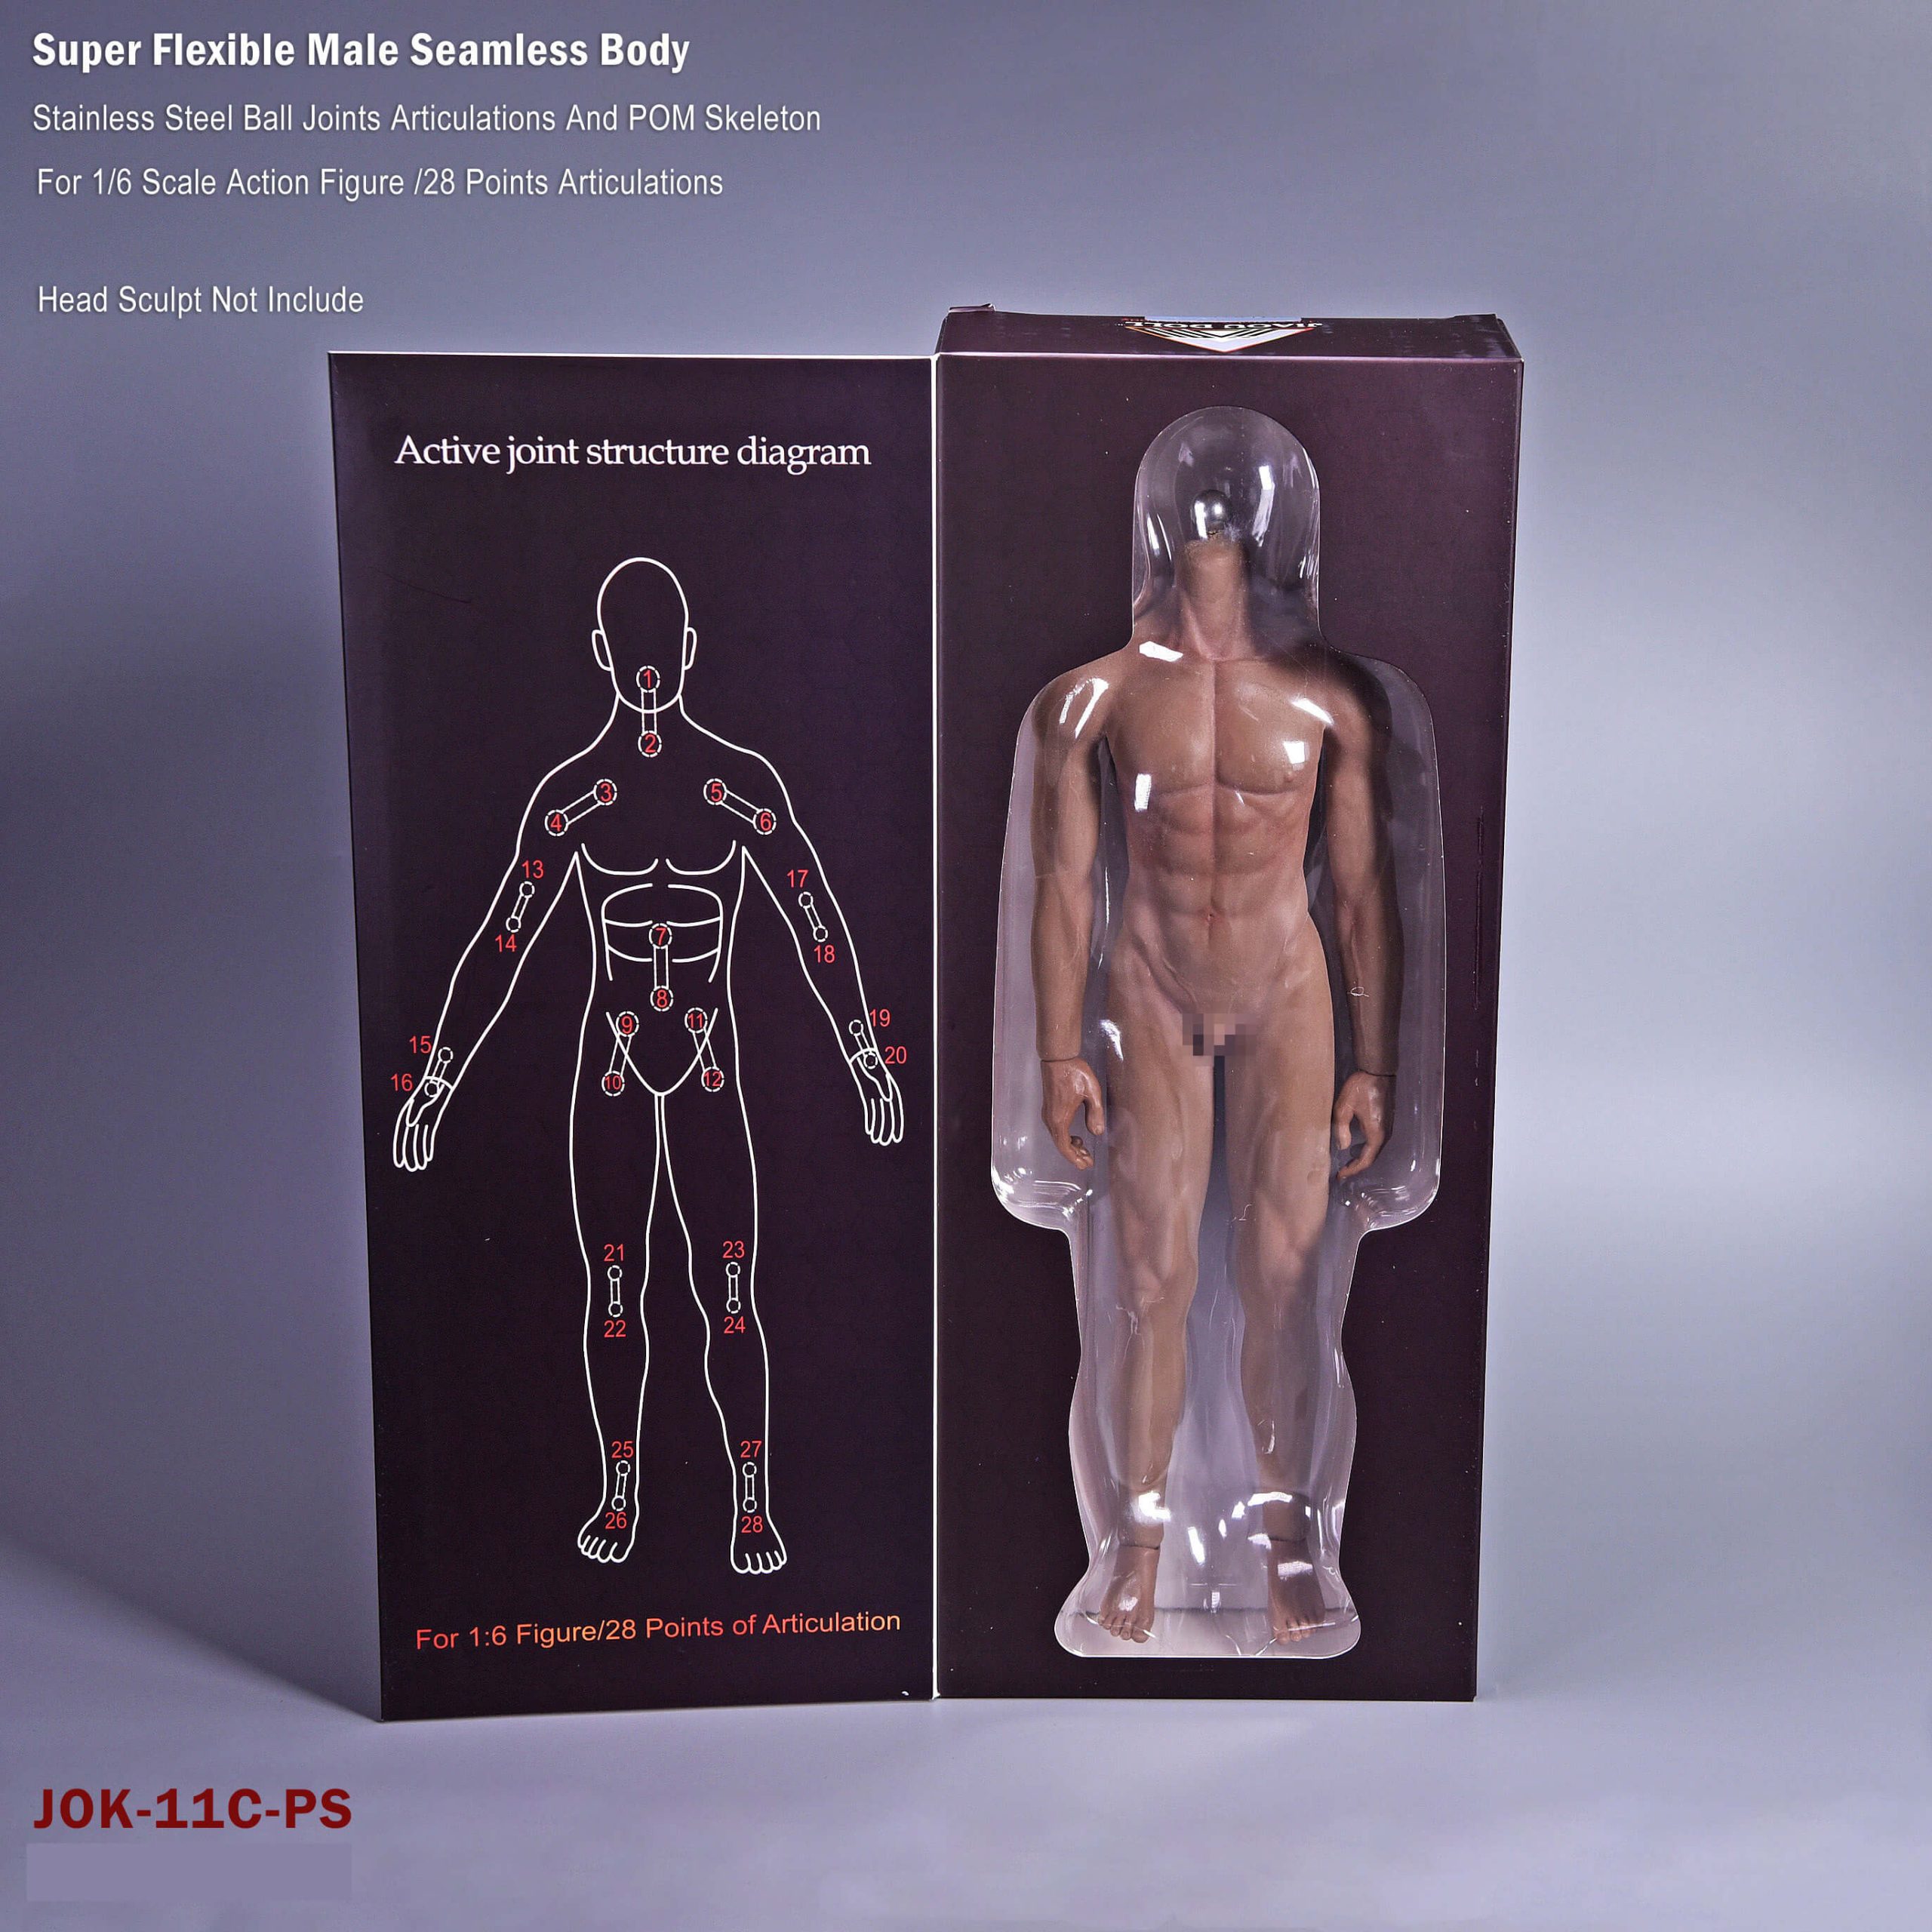 https://fabfigures.com/wp-content/uploads/2022/12/1-6th-JIAOU-DOLL-Male-Seamless-Skeleton-Muscle-Body_5-scaled.jpg